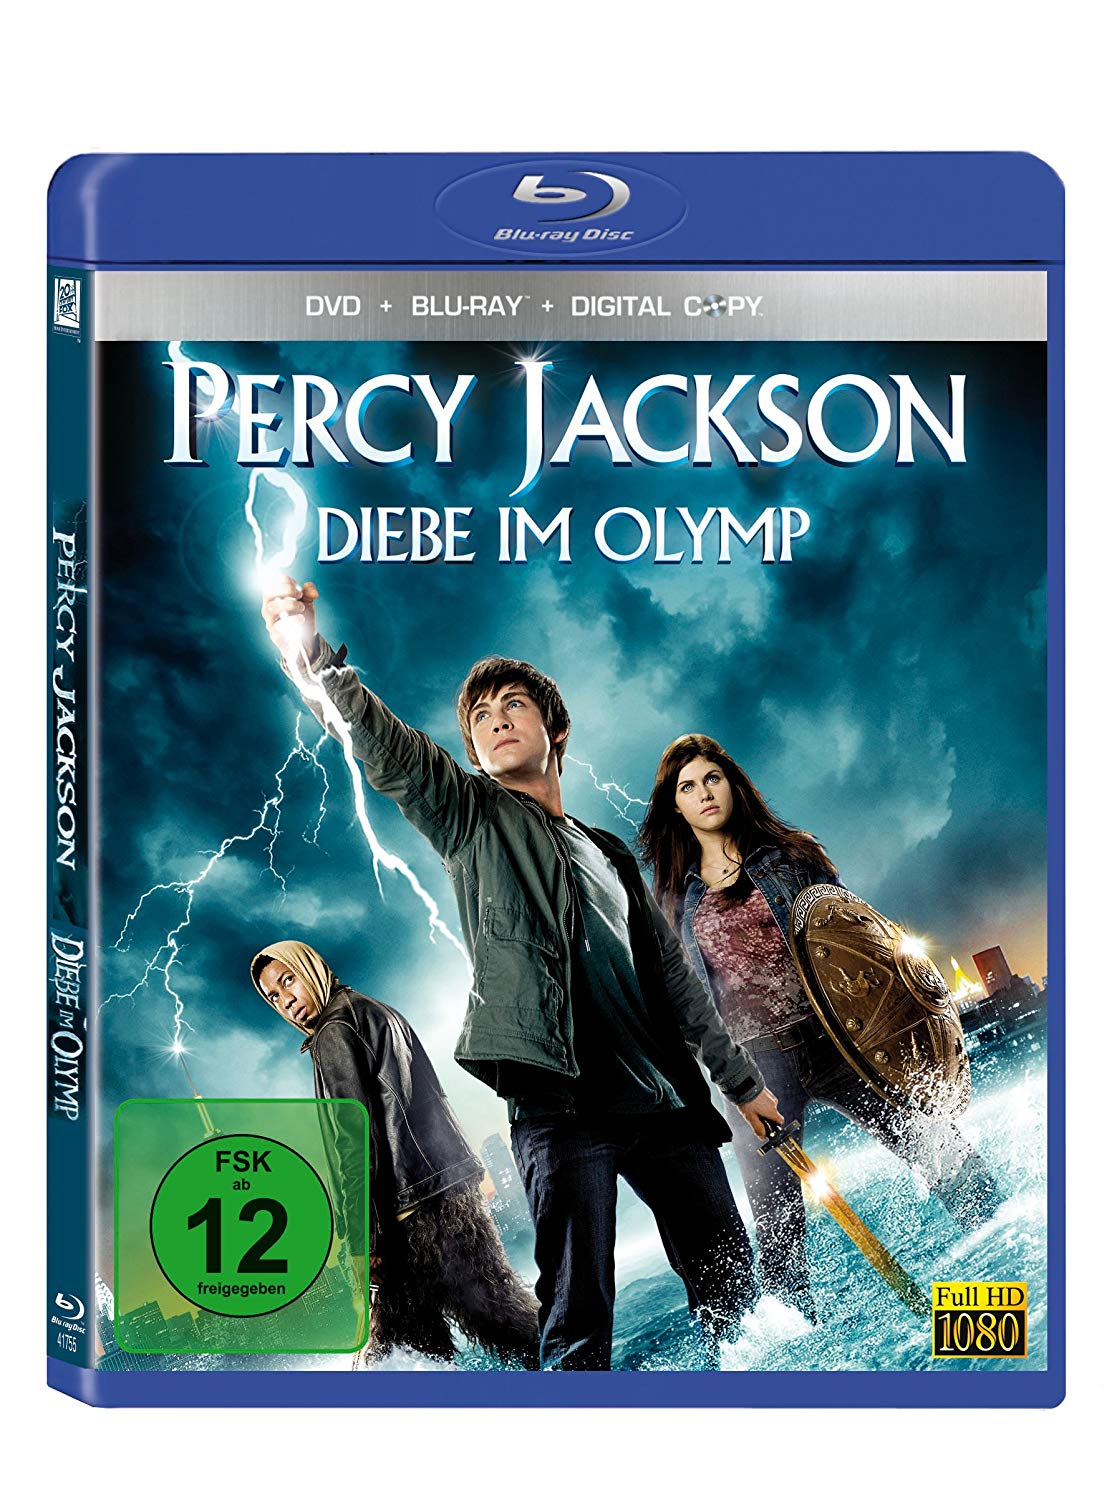 Percy jackson and the olympians full movie in hindi download filmyzilla